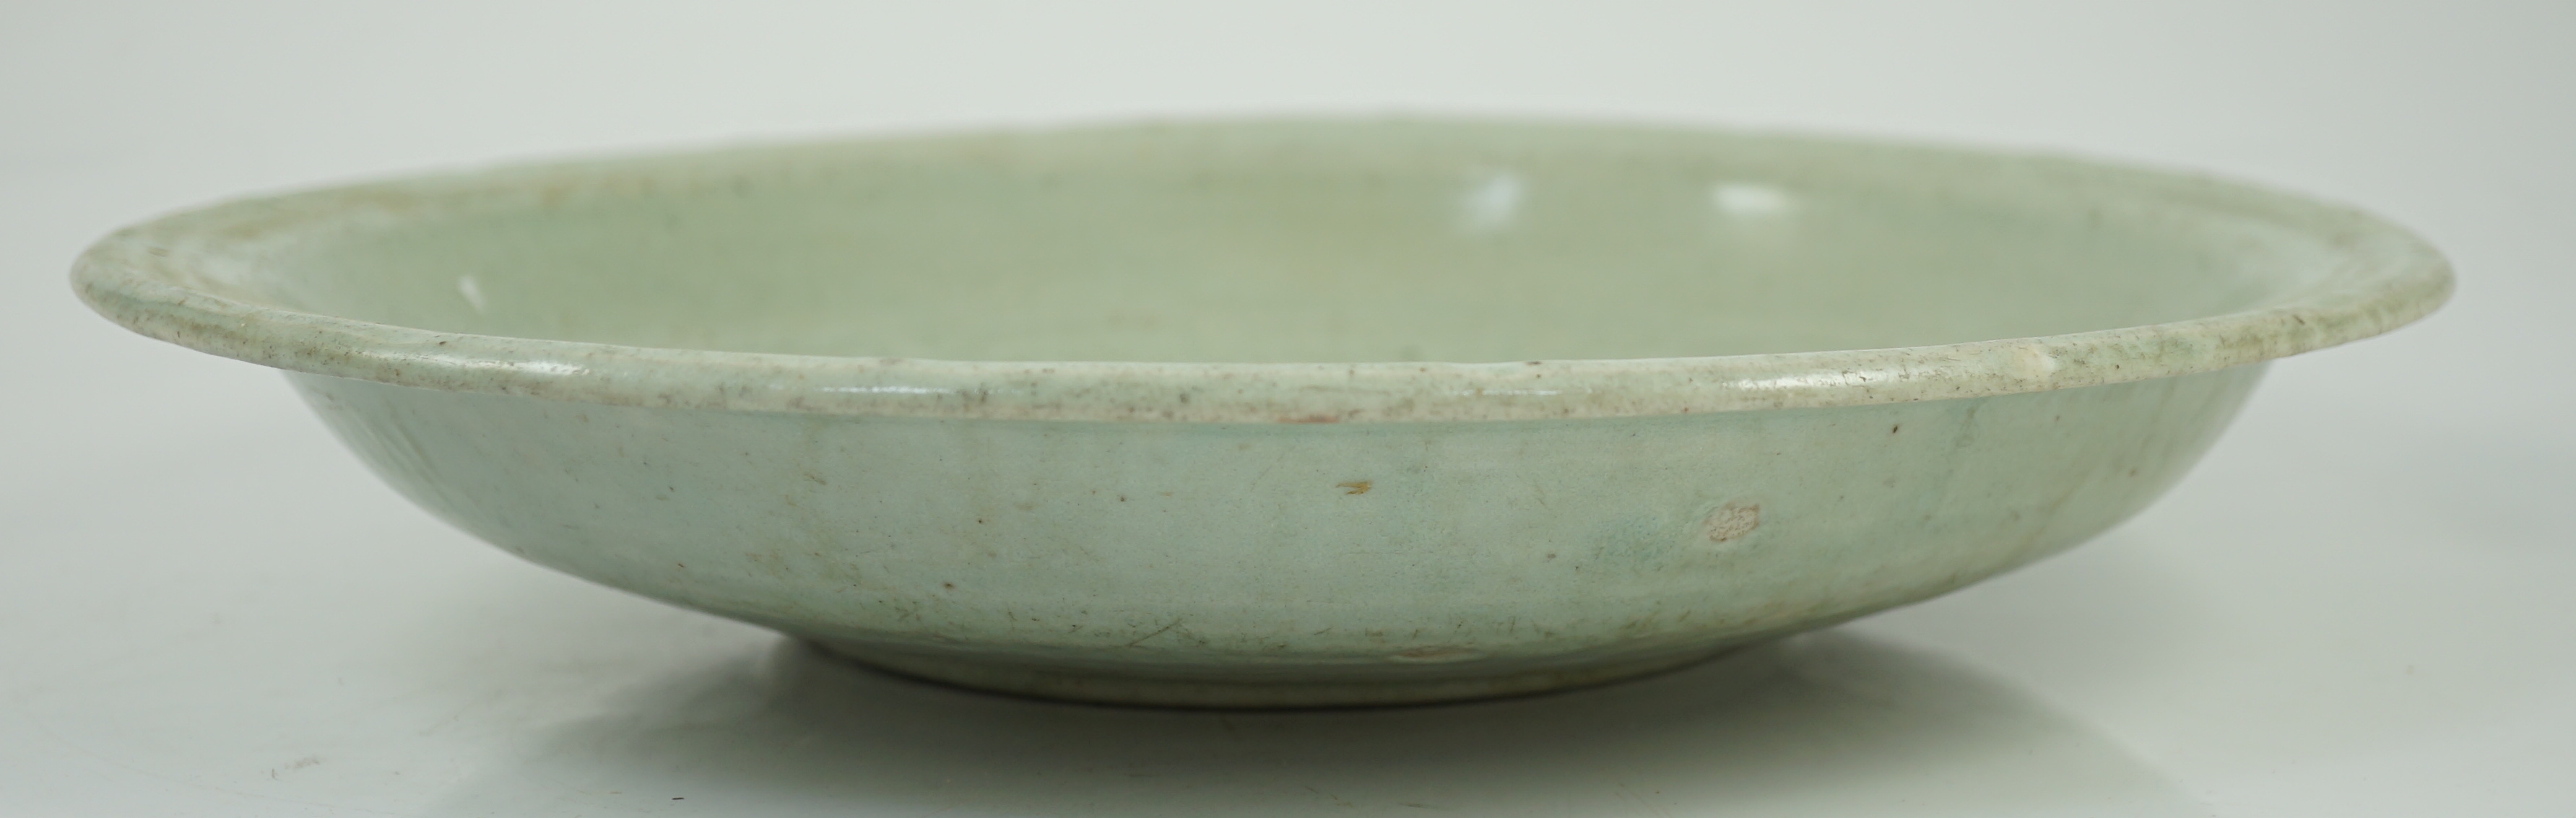 A Chinese Longquan celadon dish, Yuan-Ming dynasty, 13th/14th century, covered in a pale sea green - Image 3 of 10